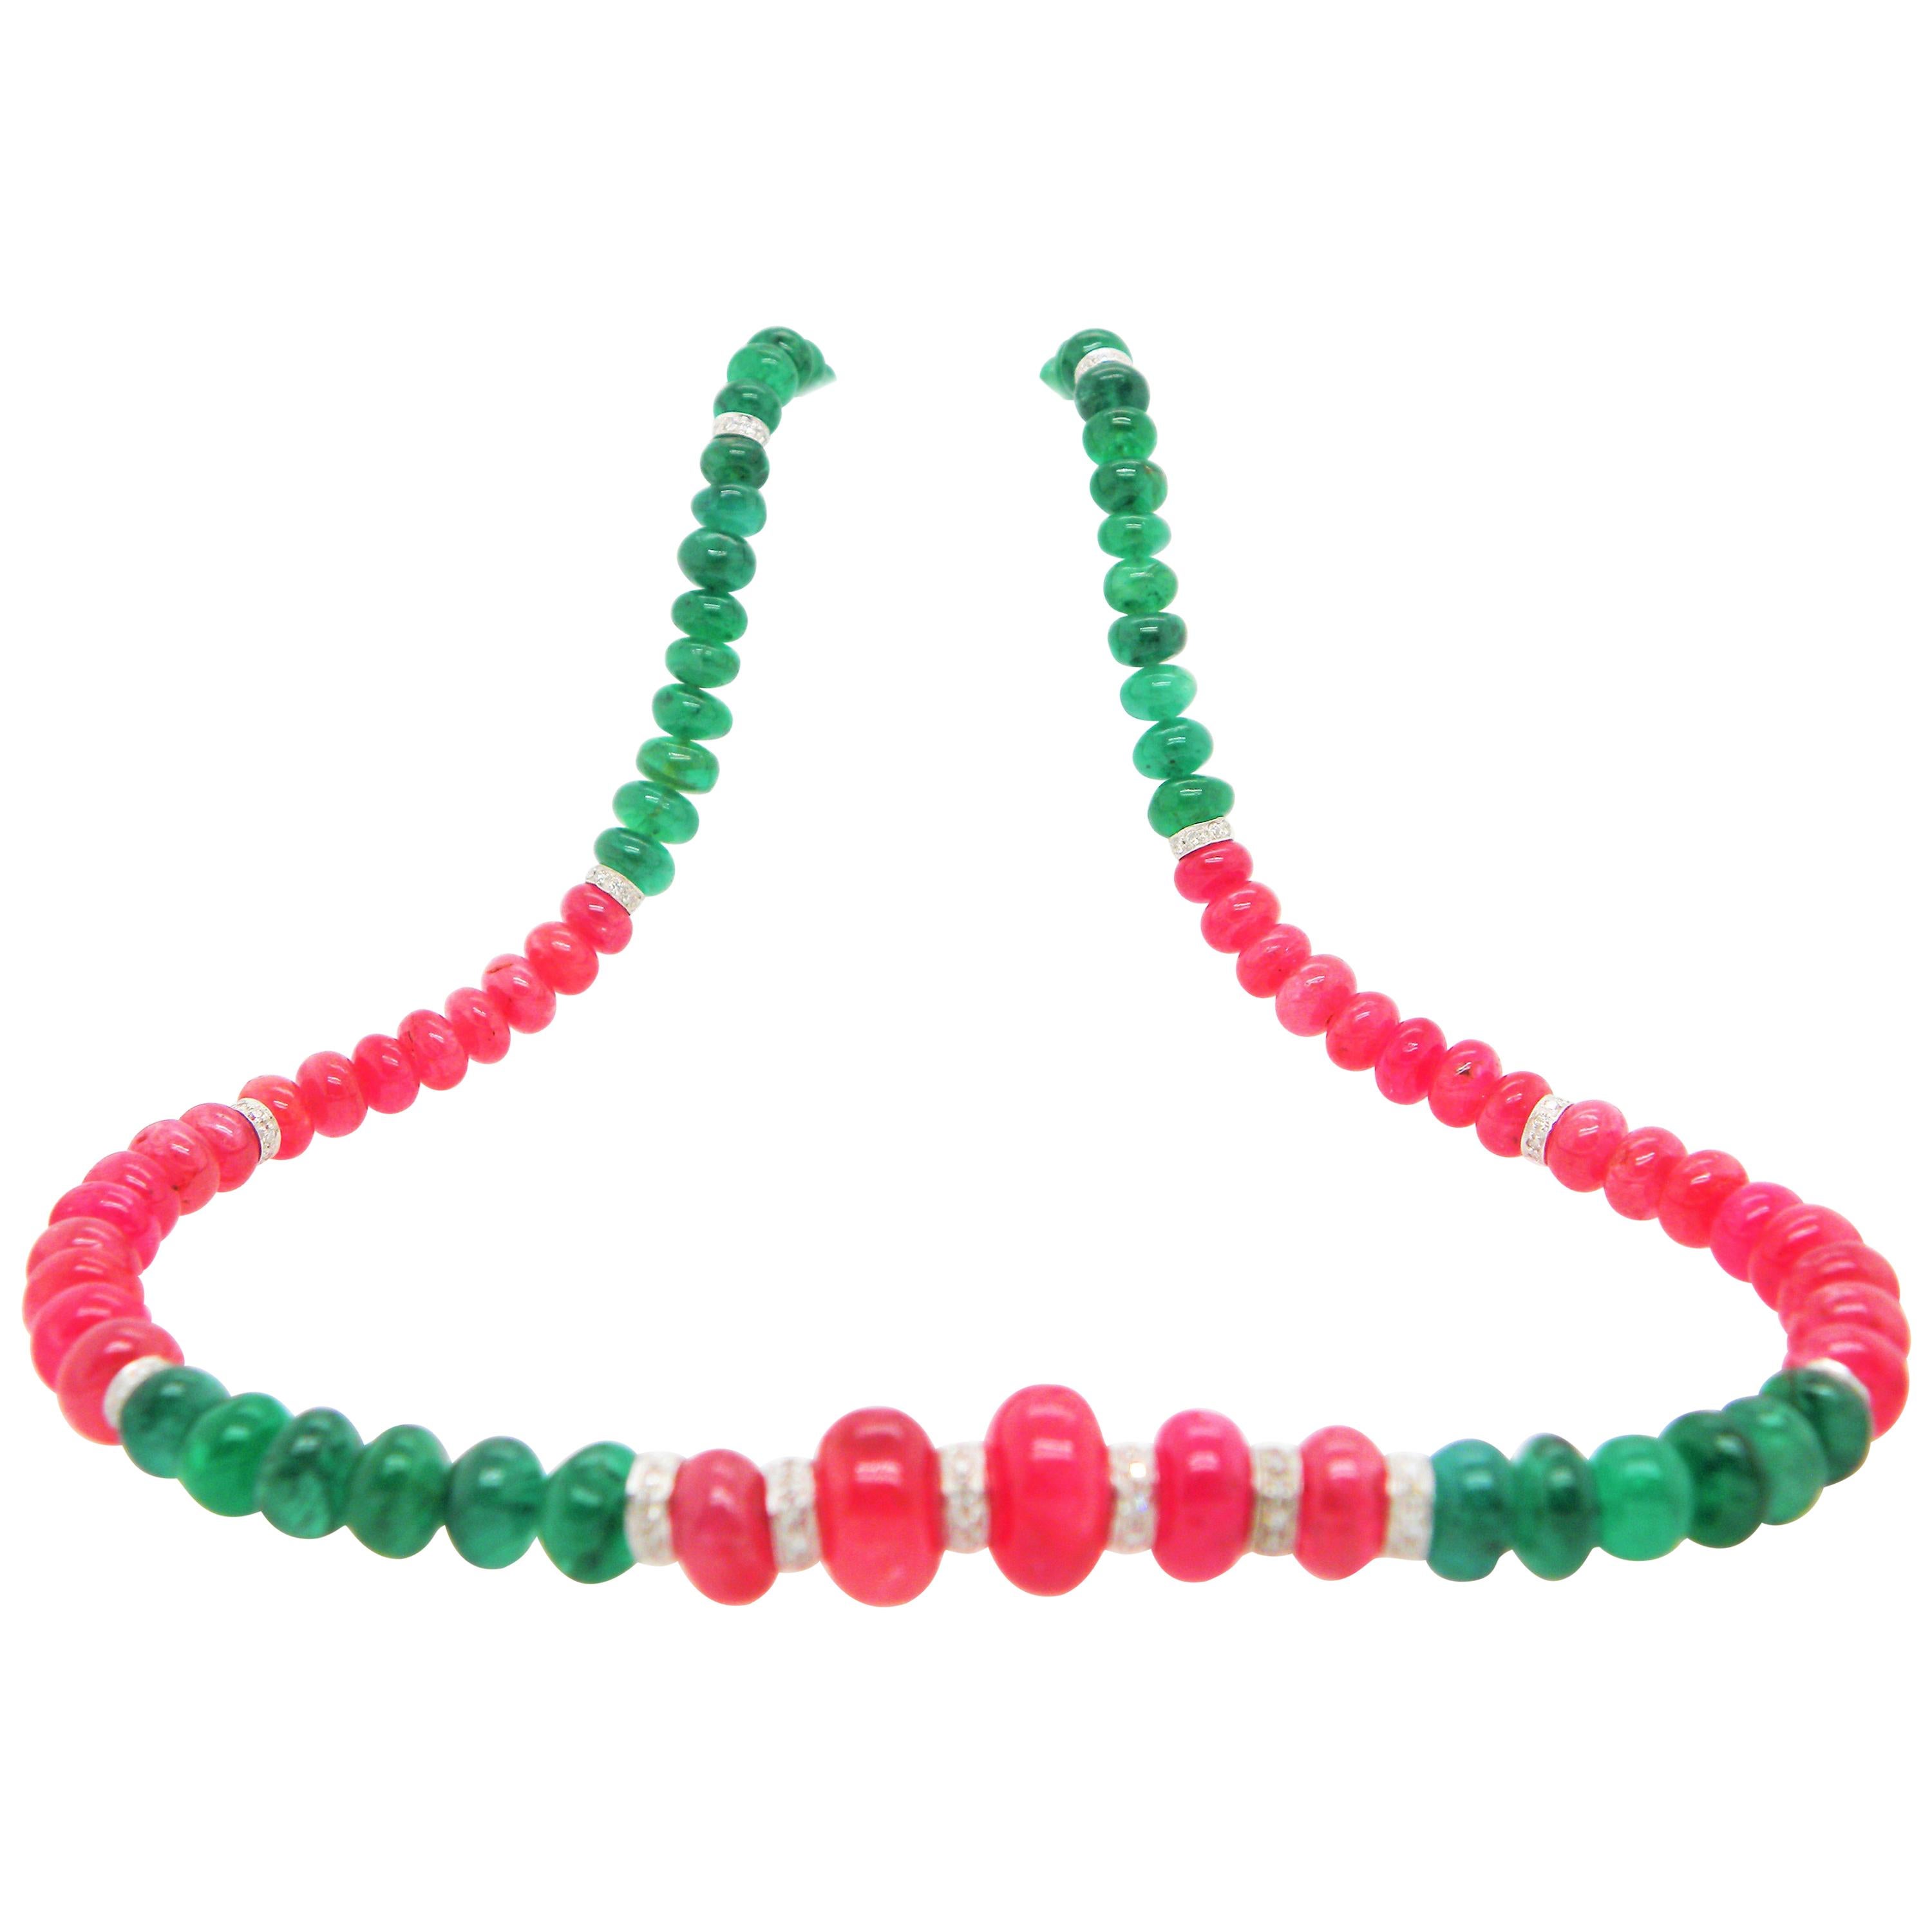 Burmese Ruby and Emerald Beads White Diamond Gold Necklace: 

A beautiful necklace, it features luscious Burmese ruby and emerald beads weighing 121.98 carat and 65.42 carat respectively, with 14 white round brilliant diamond rondelles interspersed